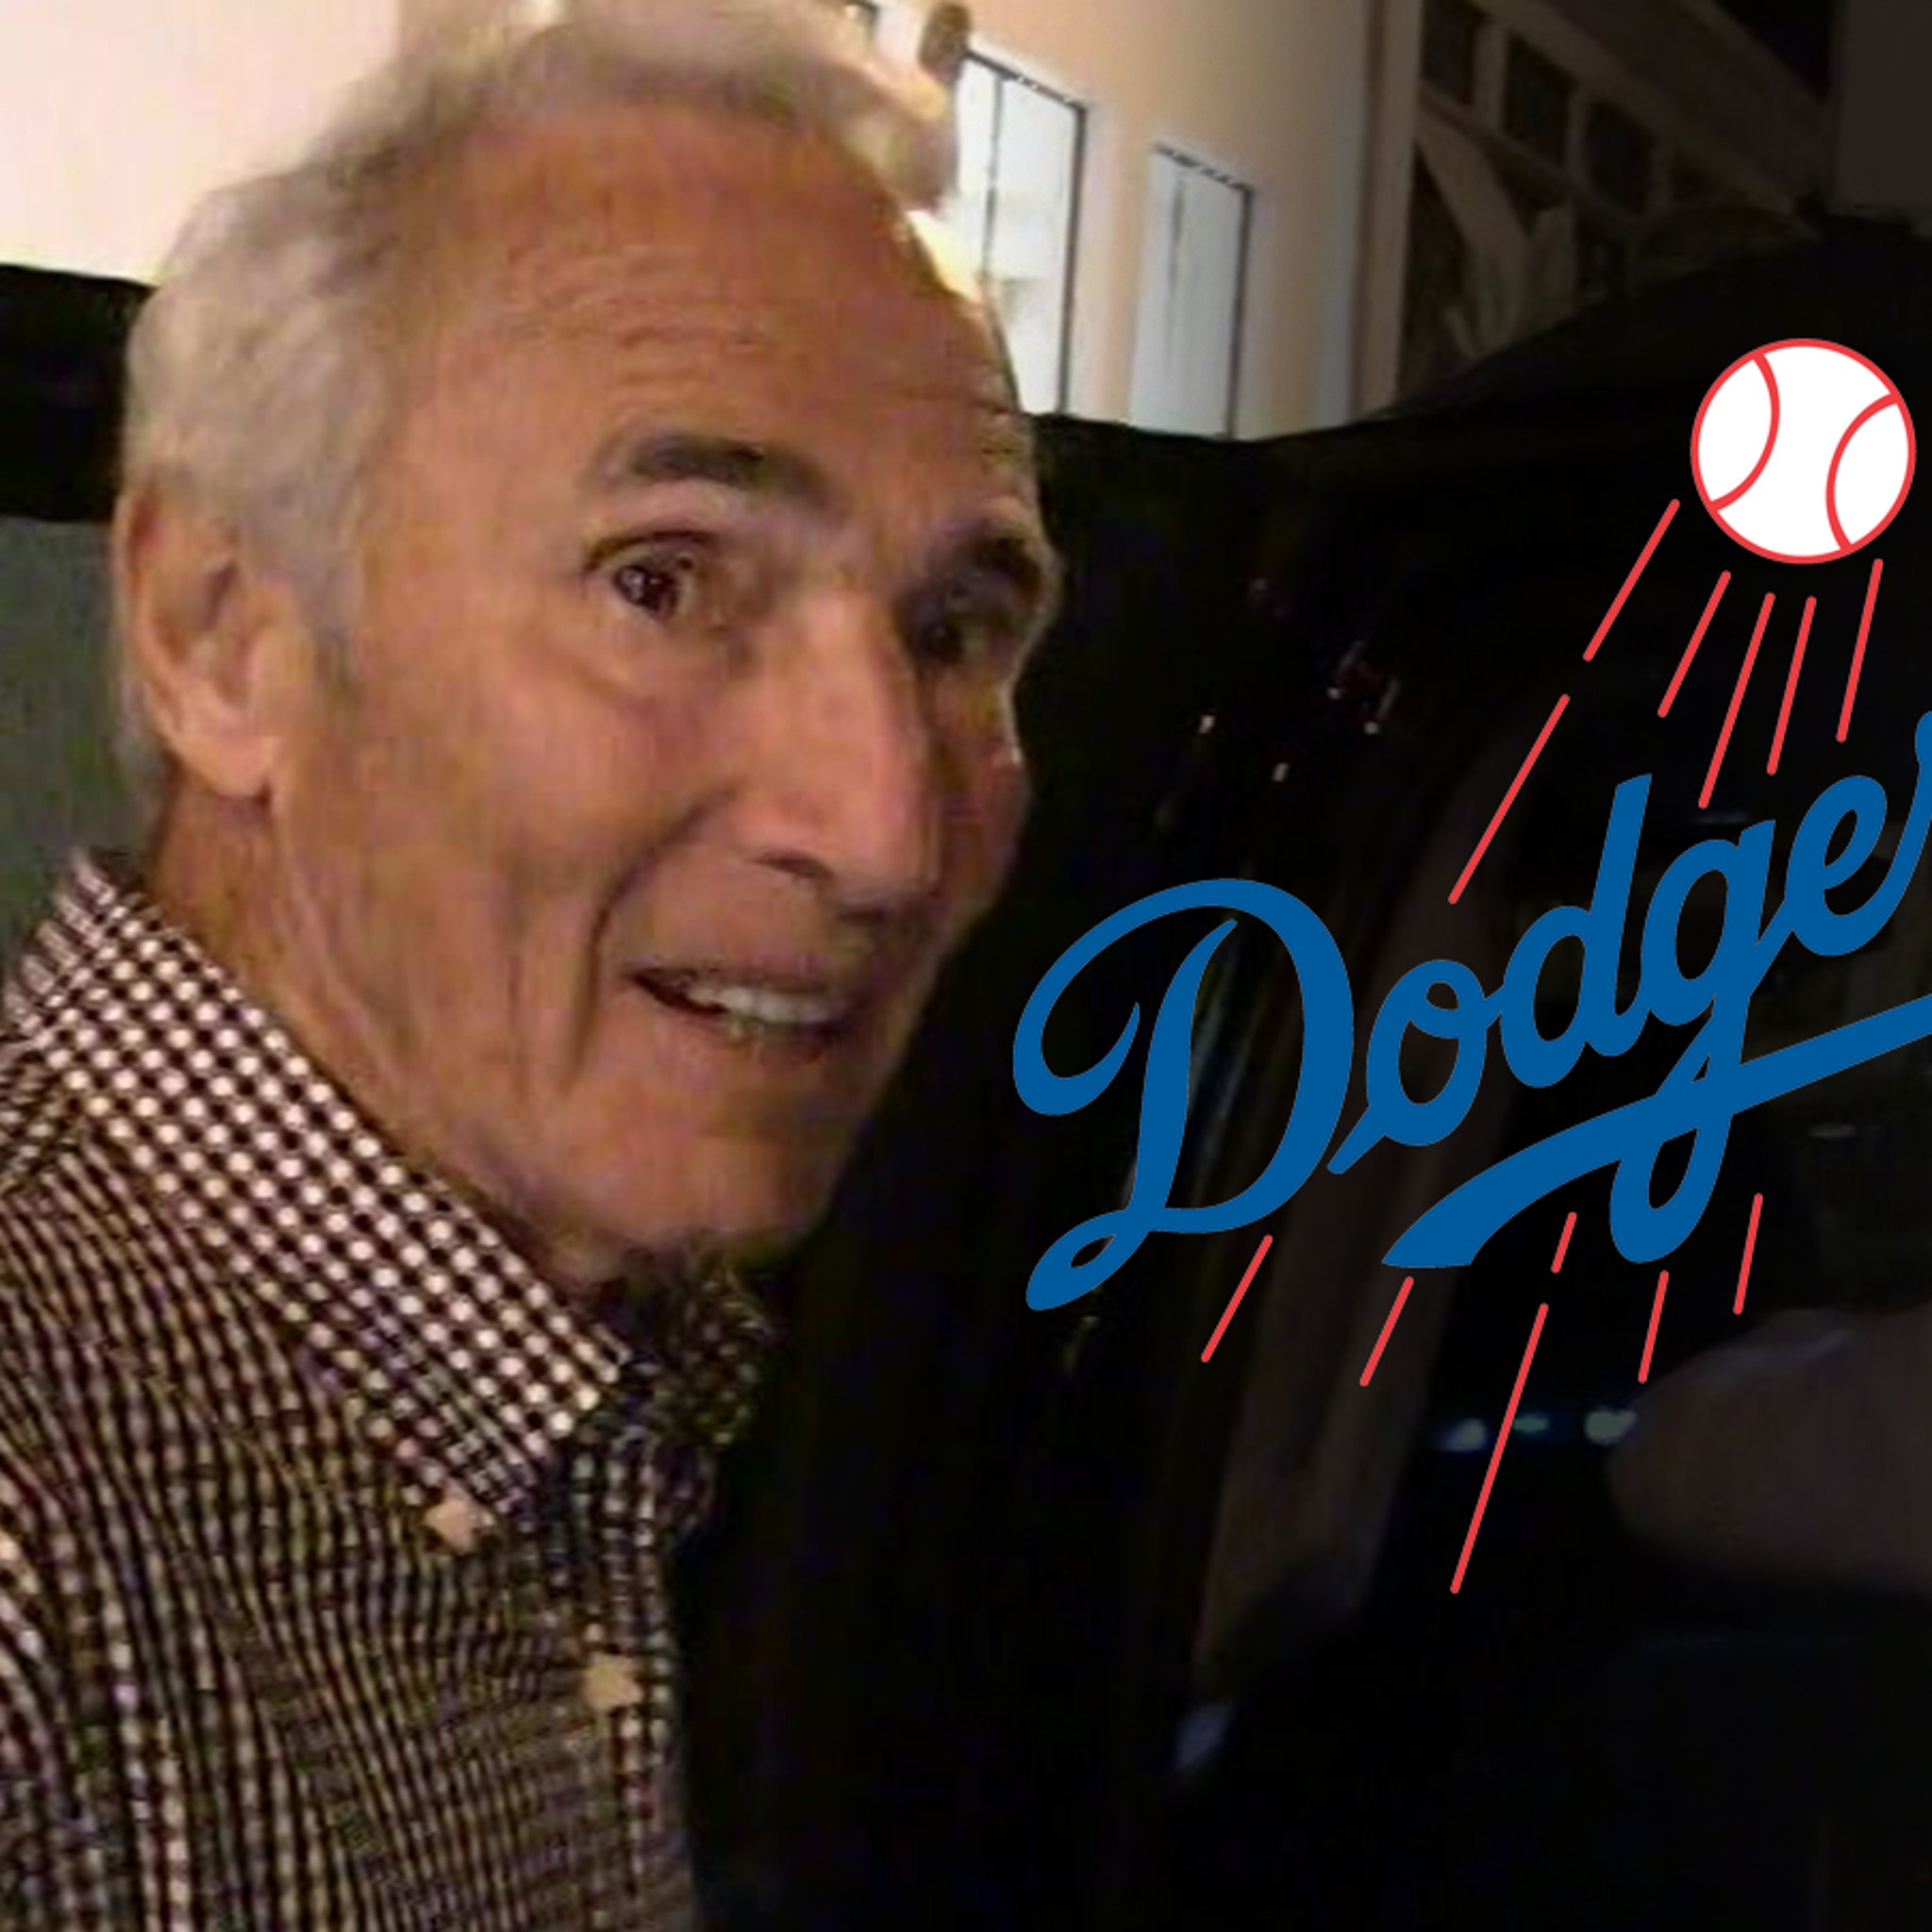 Dodgers News: Sandy Koufax Statue To Be Installed At Dodger Stadium